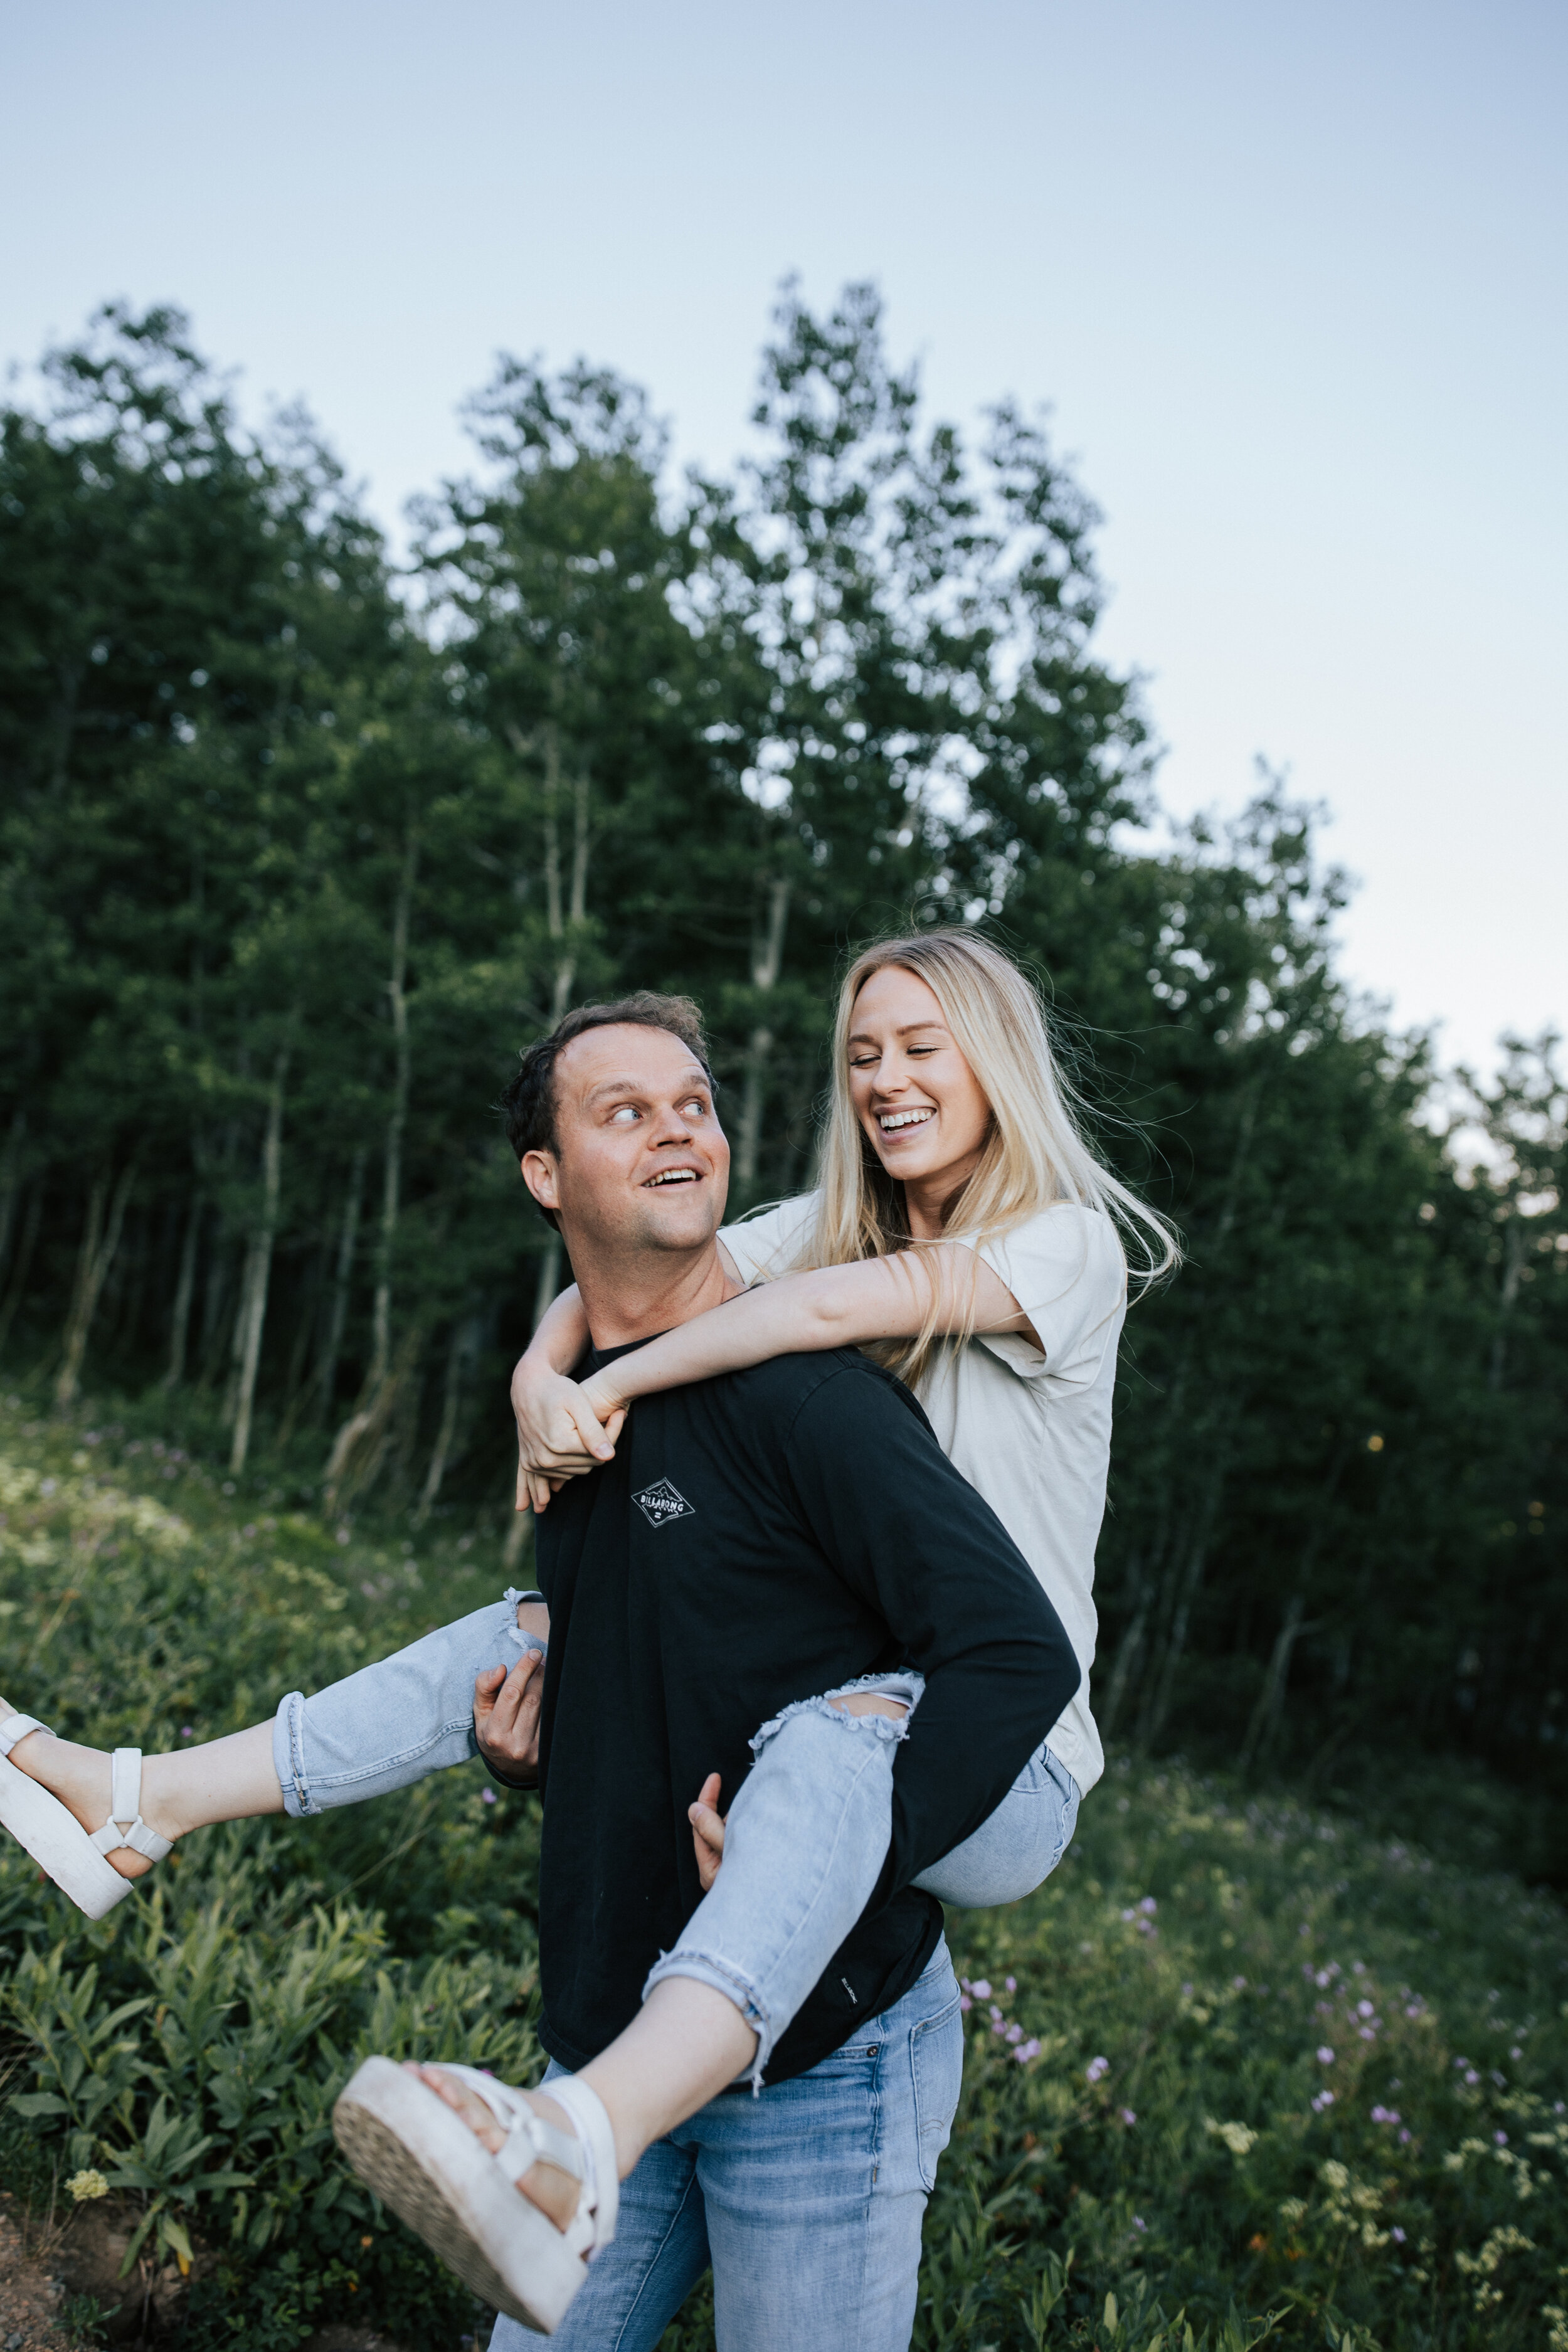  Engagement session in wildflowers in the mountains near Park City, Utah. Summertime engagement photos with mountain views. Engaged couple doing a piggyback ride in the mountains. Outfit inspo. Engagement outfits. #engagementphotos #engagements #wedd